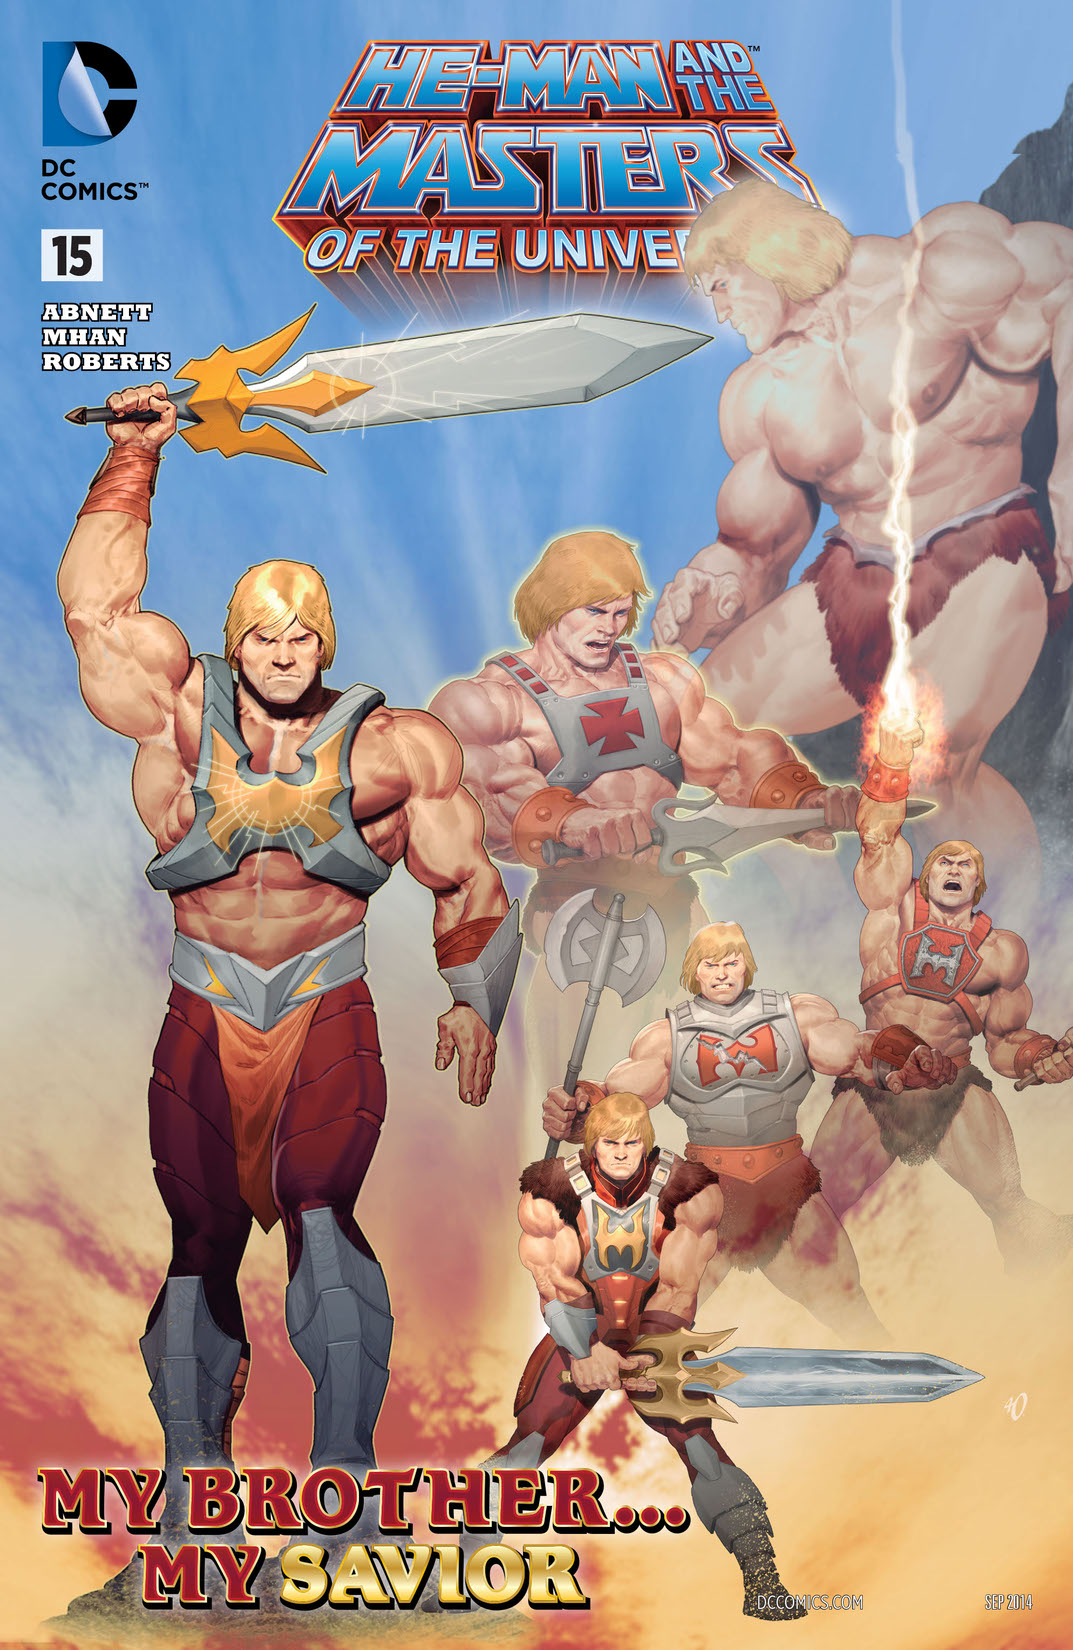 He-Man and the Masters of the Universe (2013-) #15 preview images